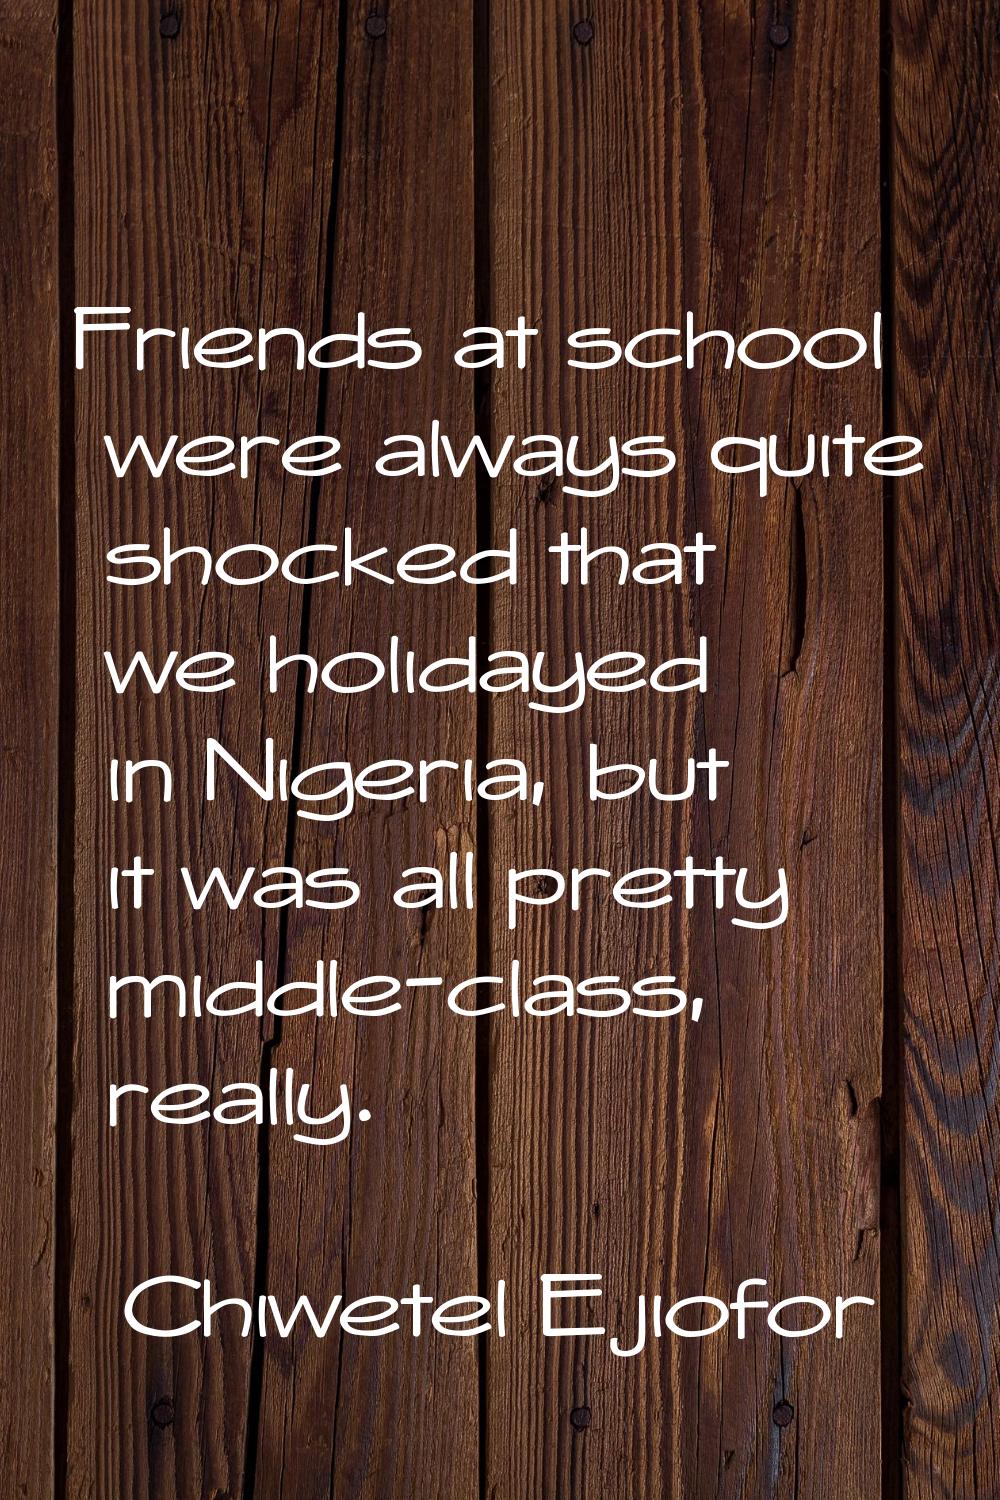 Friends at school were always quite shocked that we holidayed in Nigeria, but it was all pretty mid